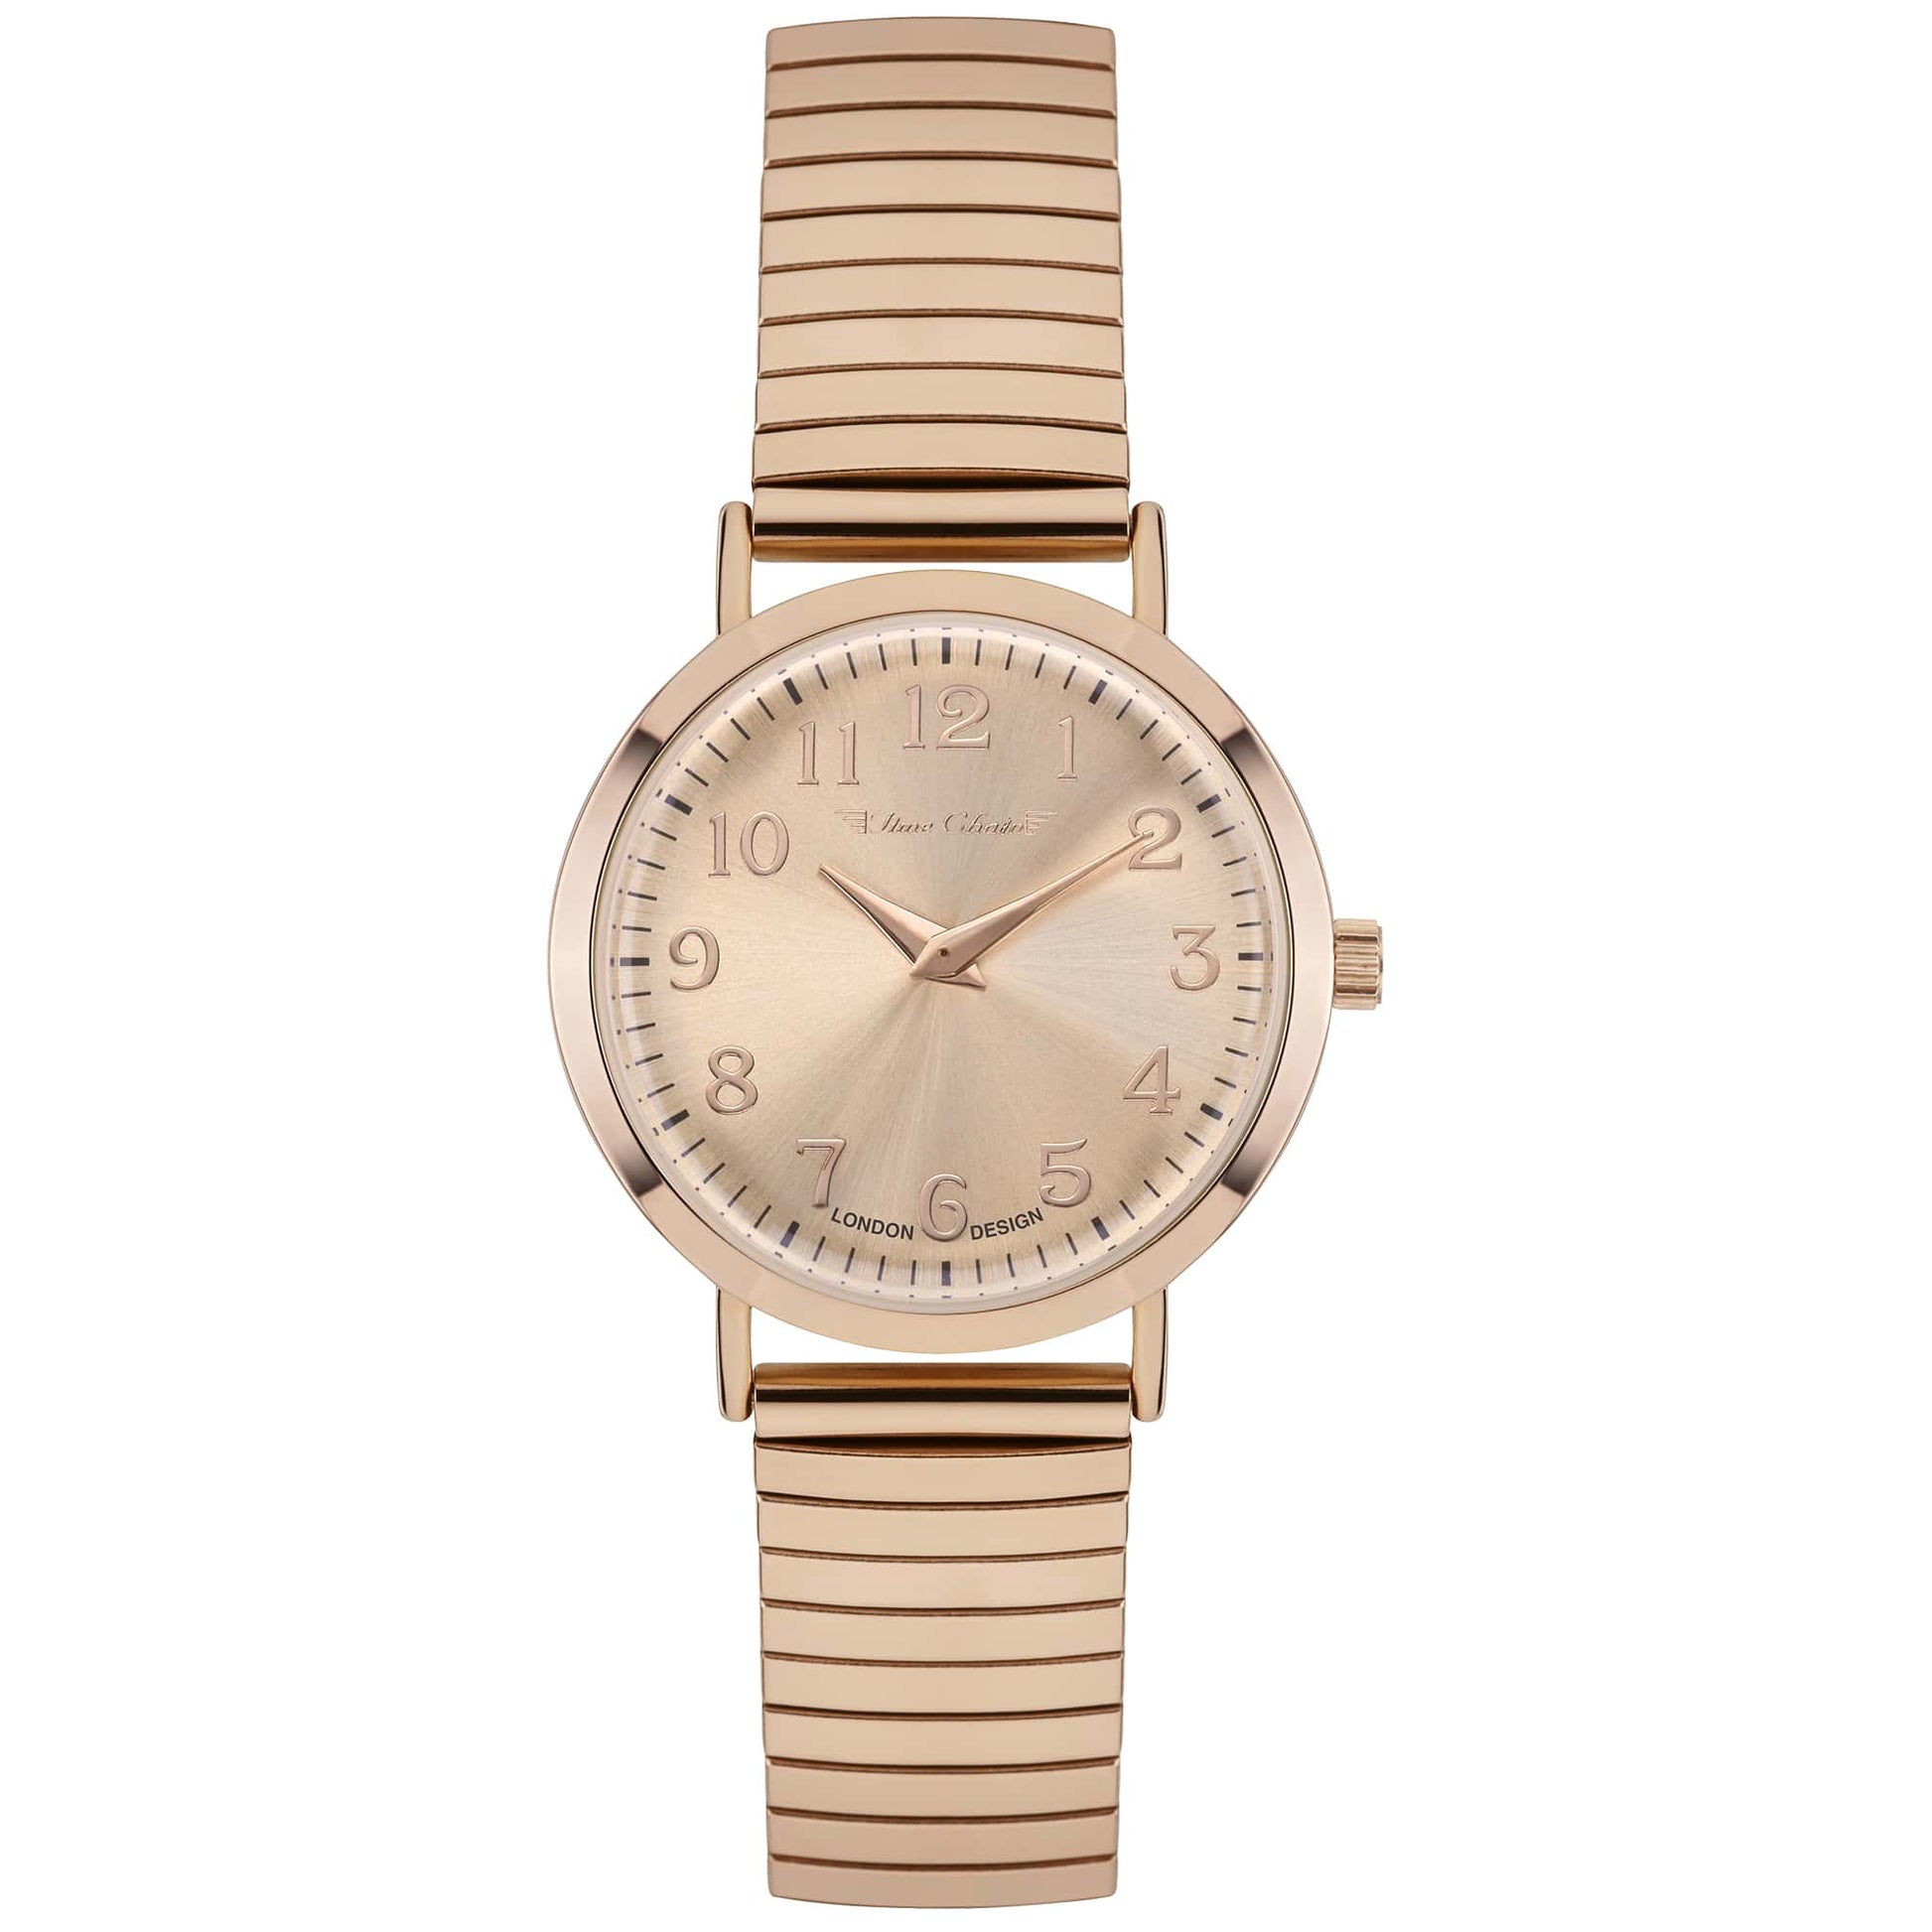 TIME CHAIN PUTNEY SPANDEX WATCH ROSE GOLD